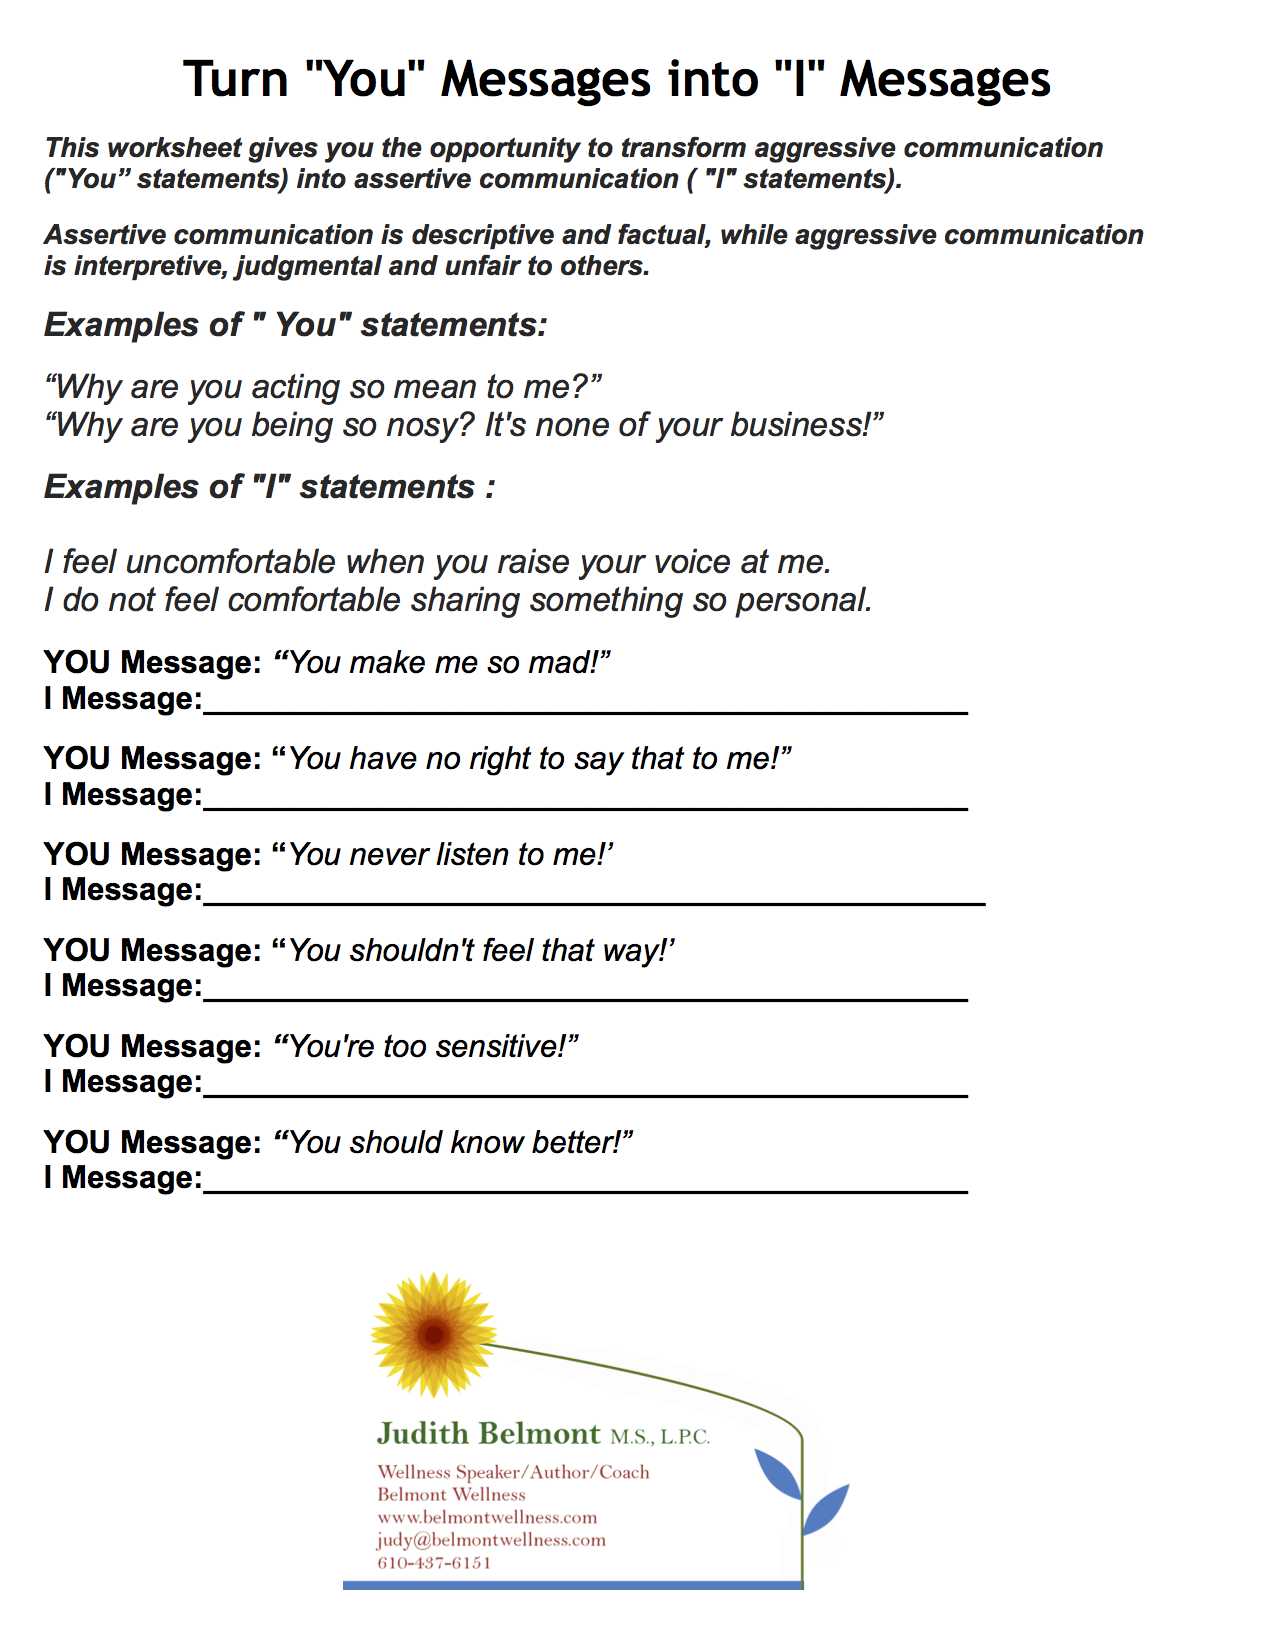 Positive Self Talk Worksheet and Turning "you" Messages Into "i" Messages